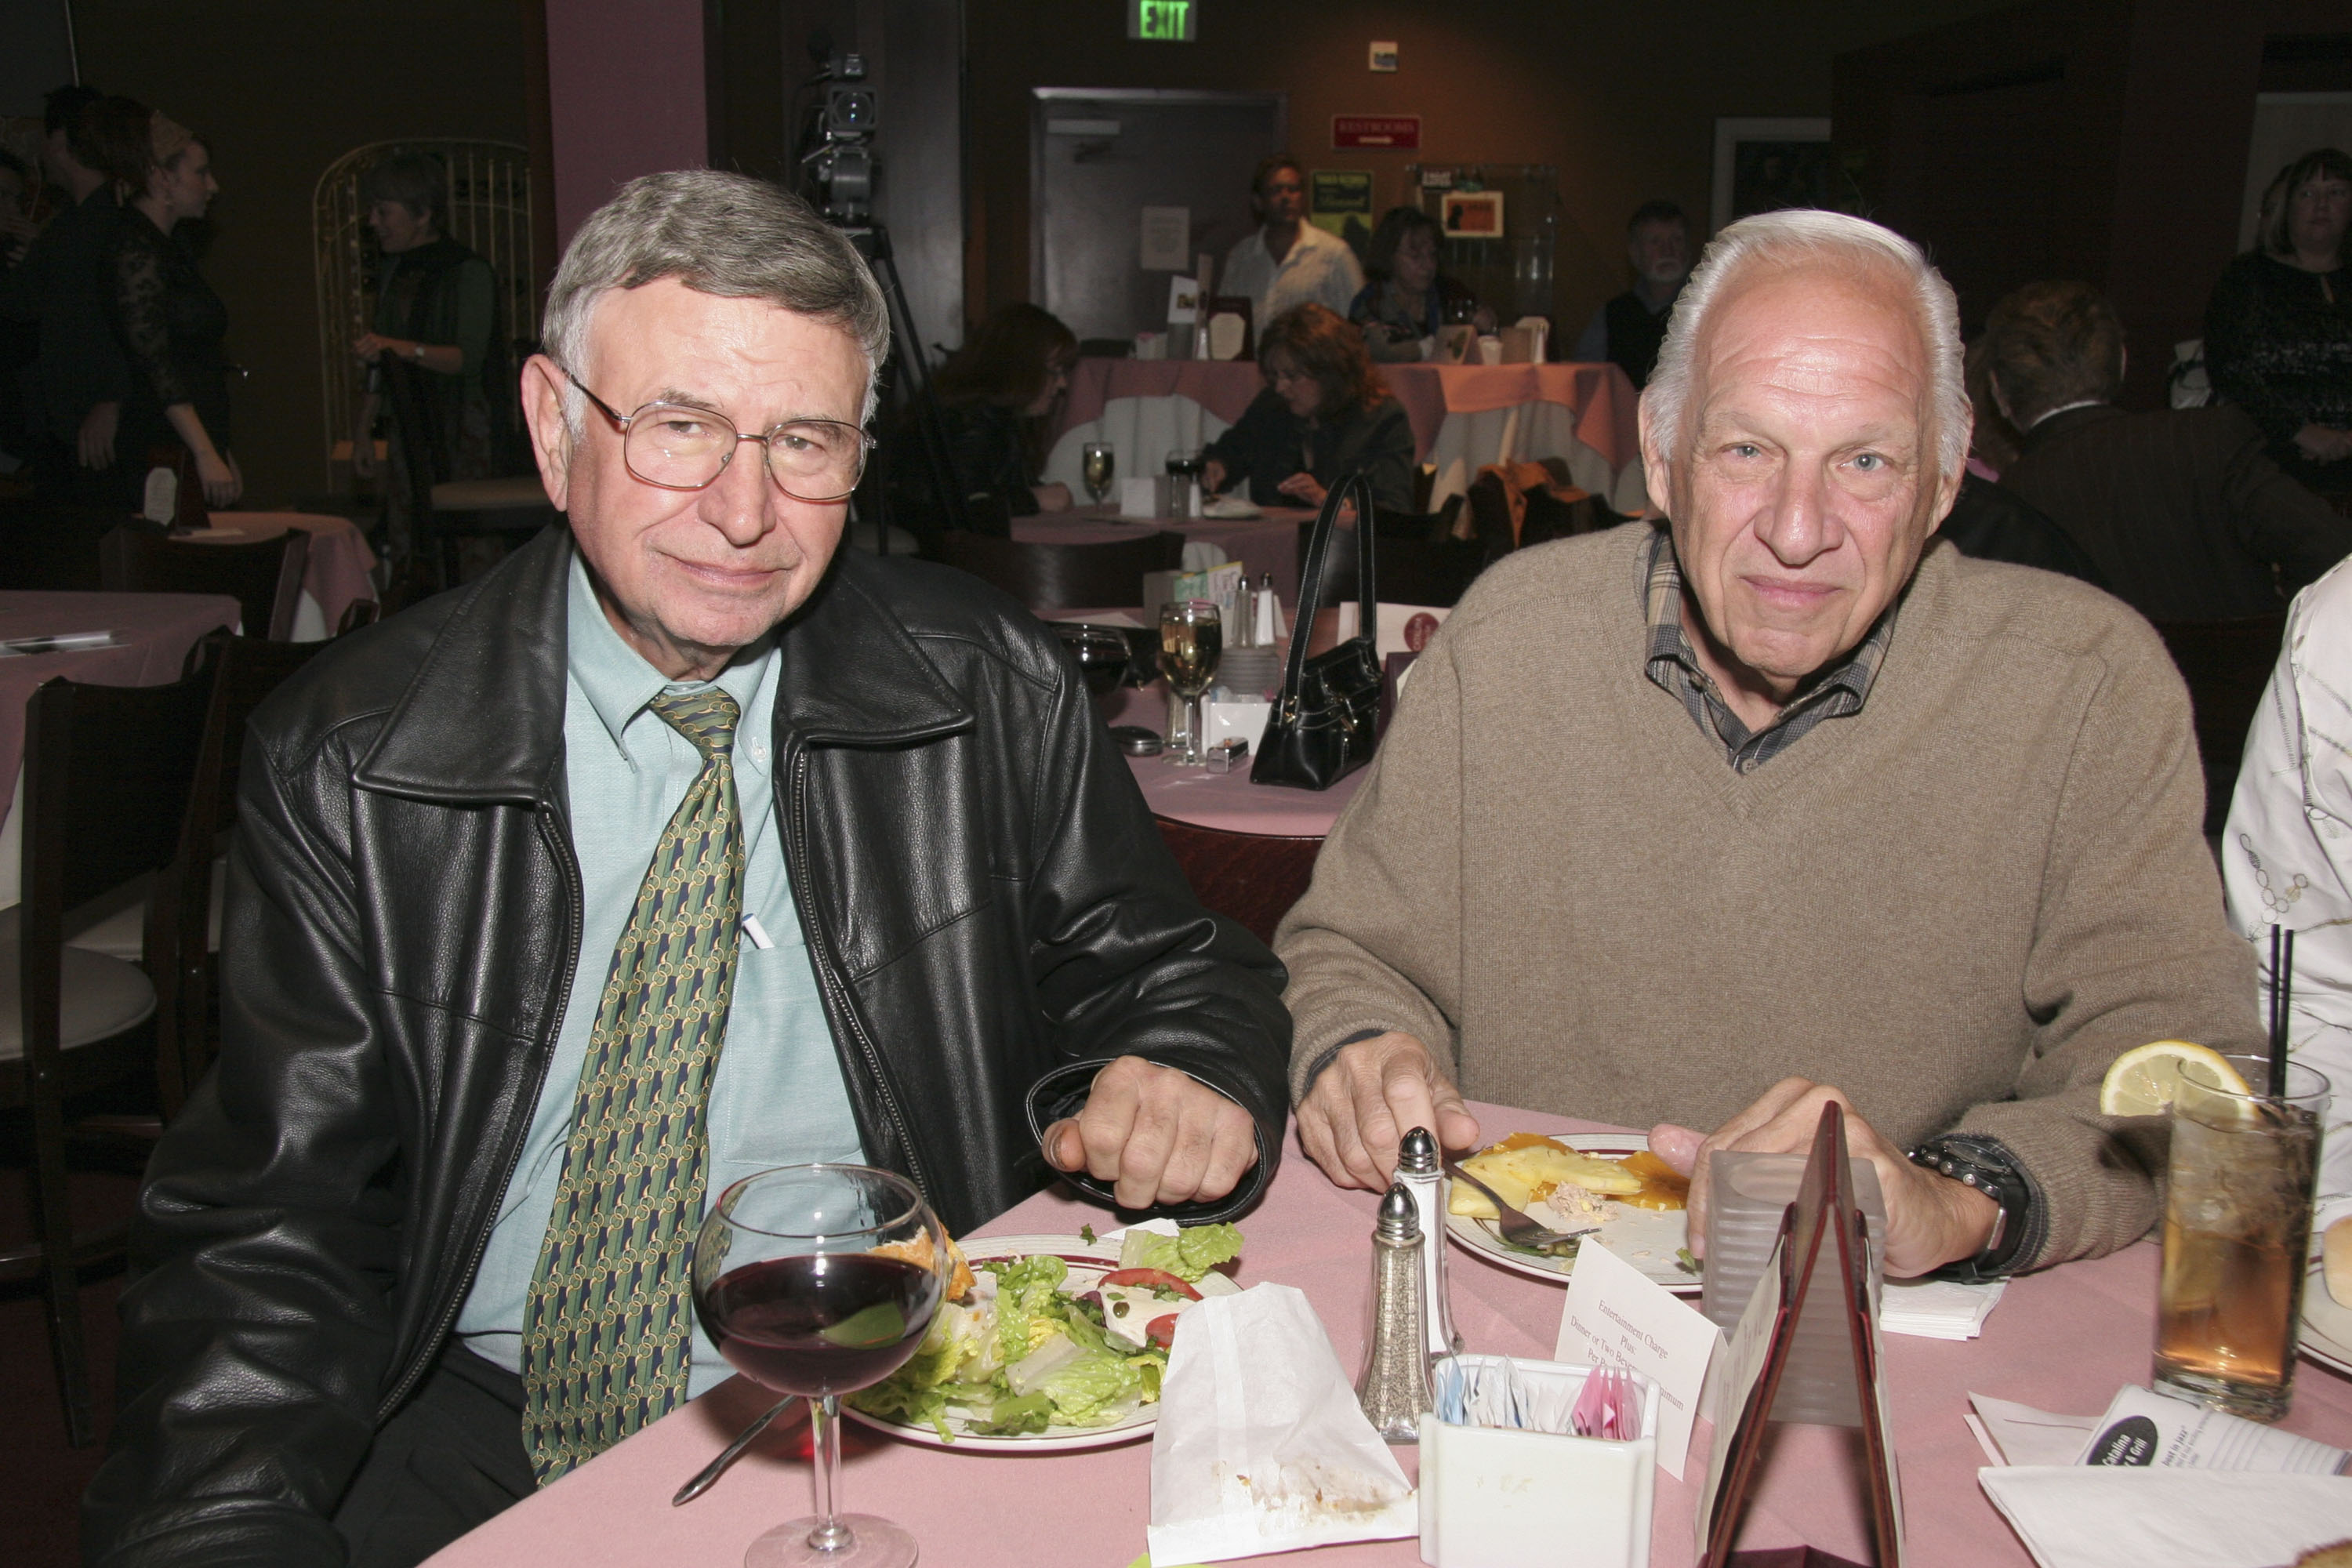 (L-R) Chick Watkins and Jerry Heller in 2005. (Photo by )